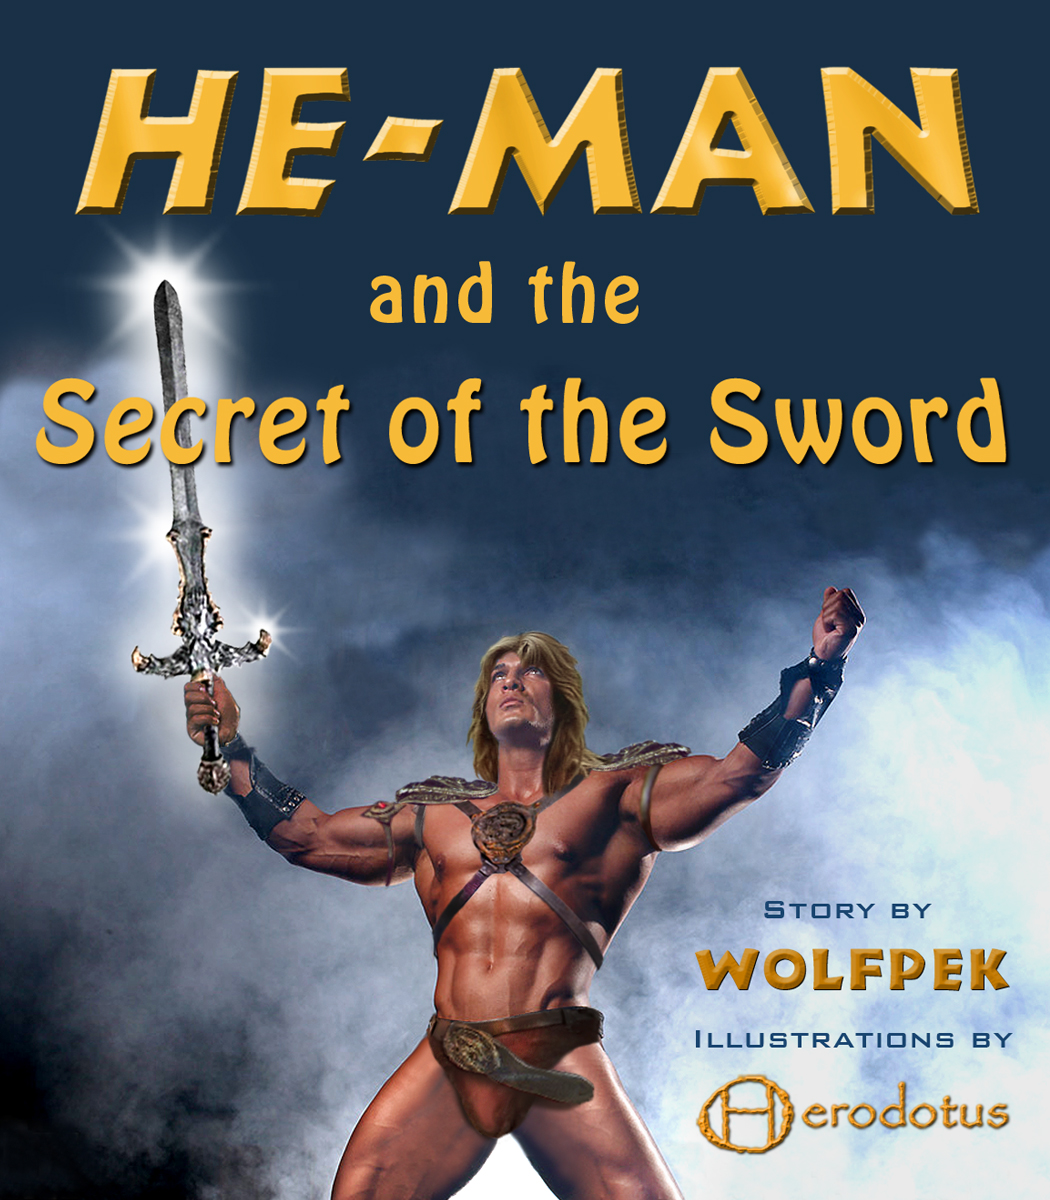 He-Man and the Secret of the Sword